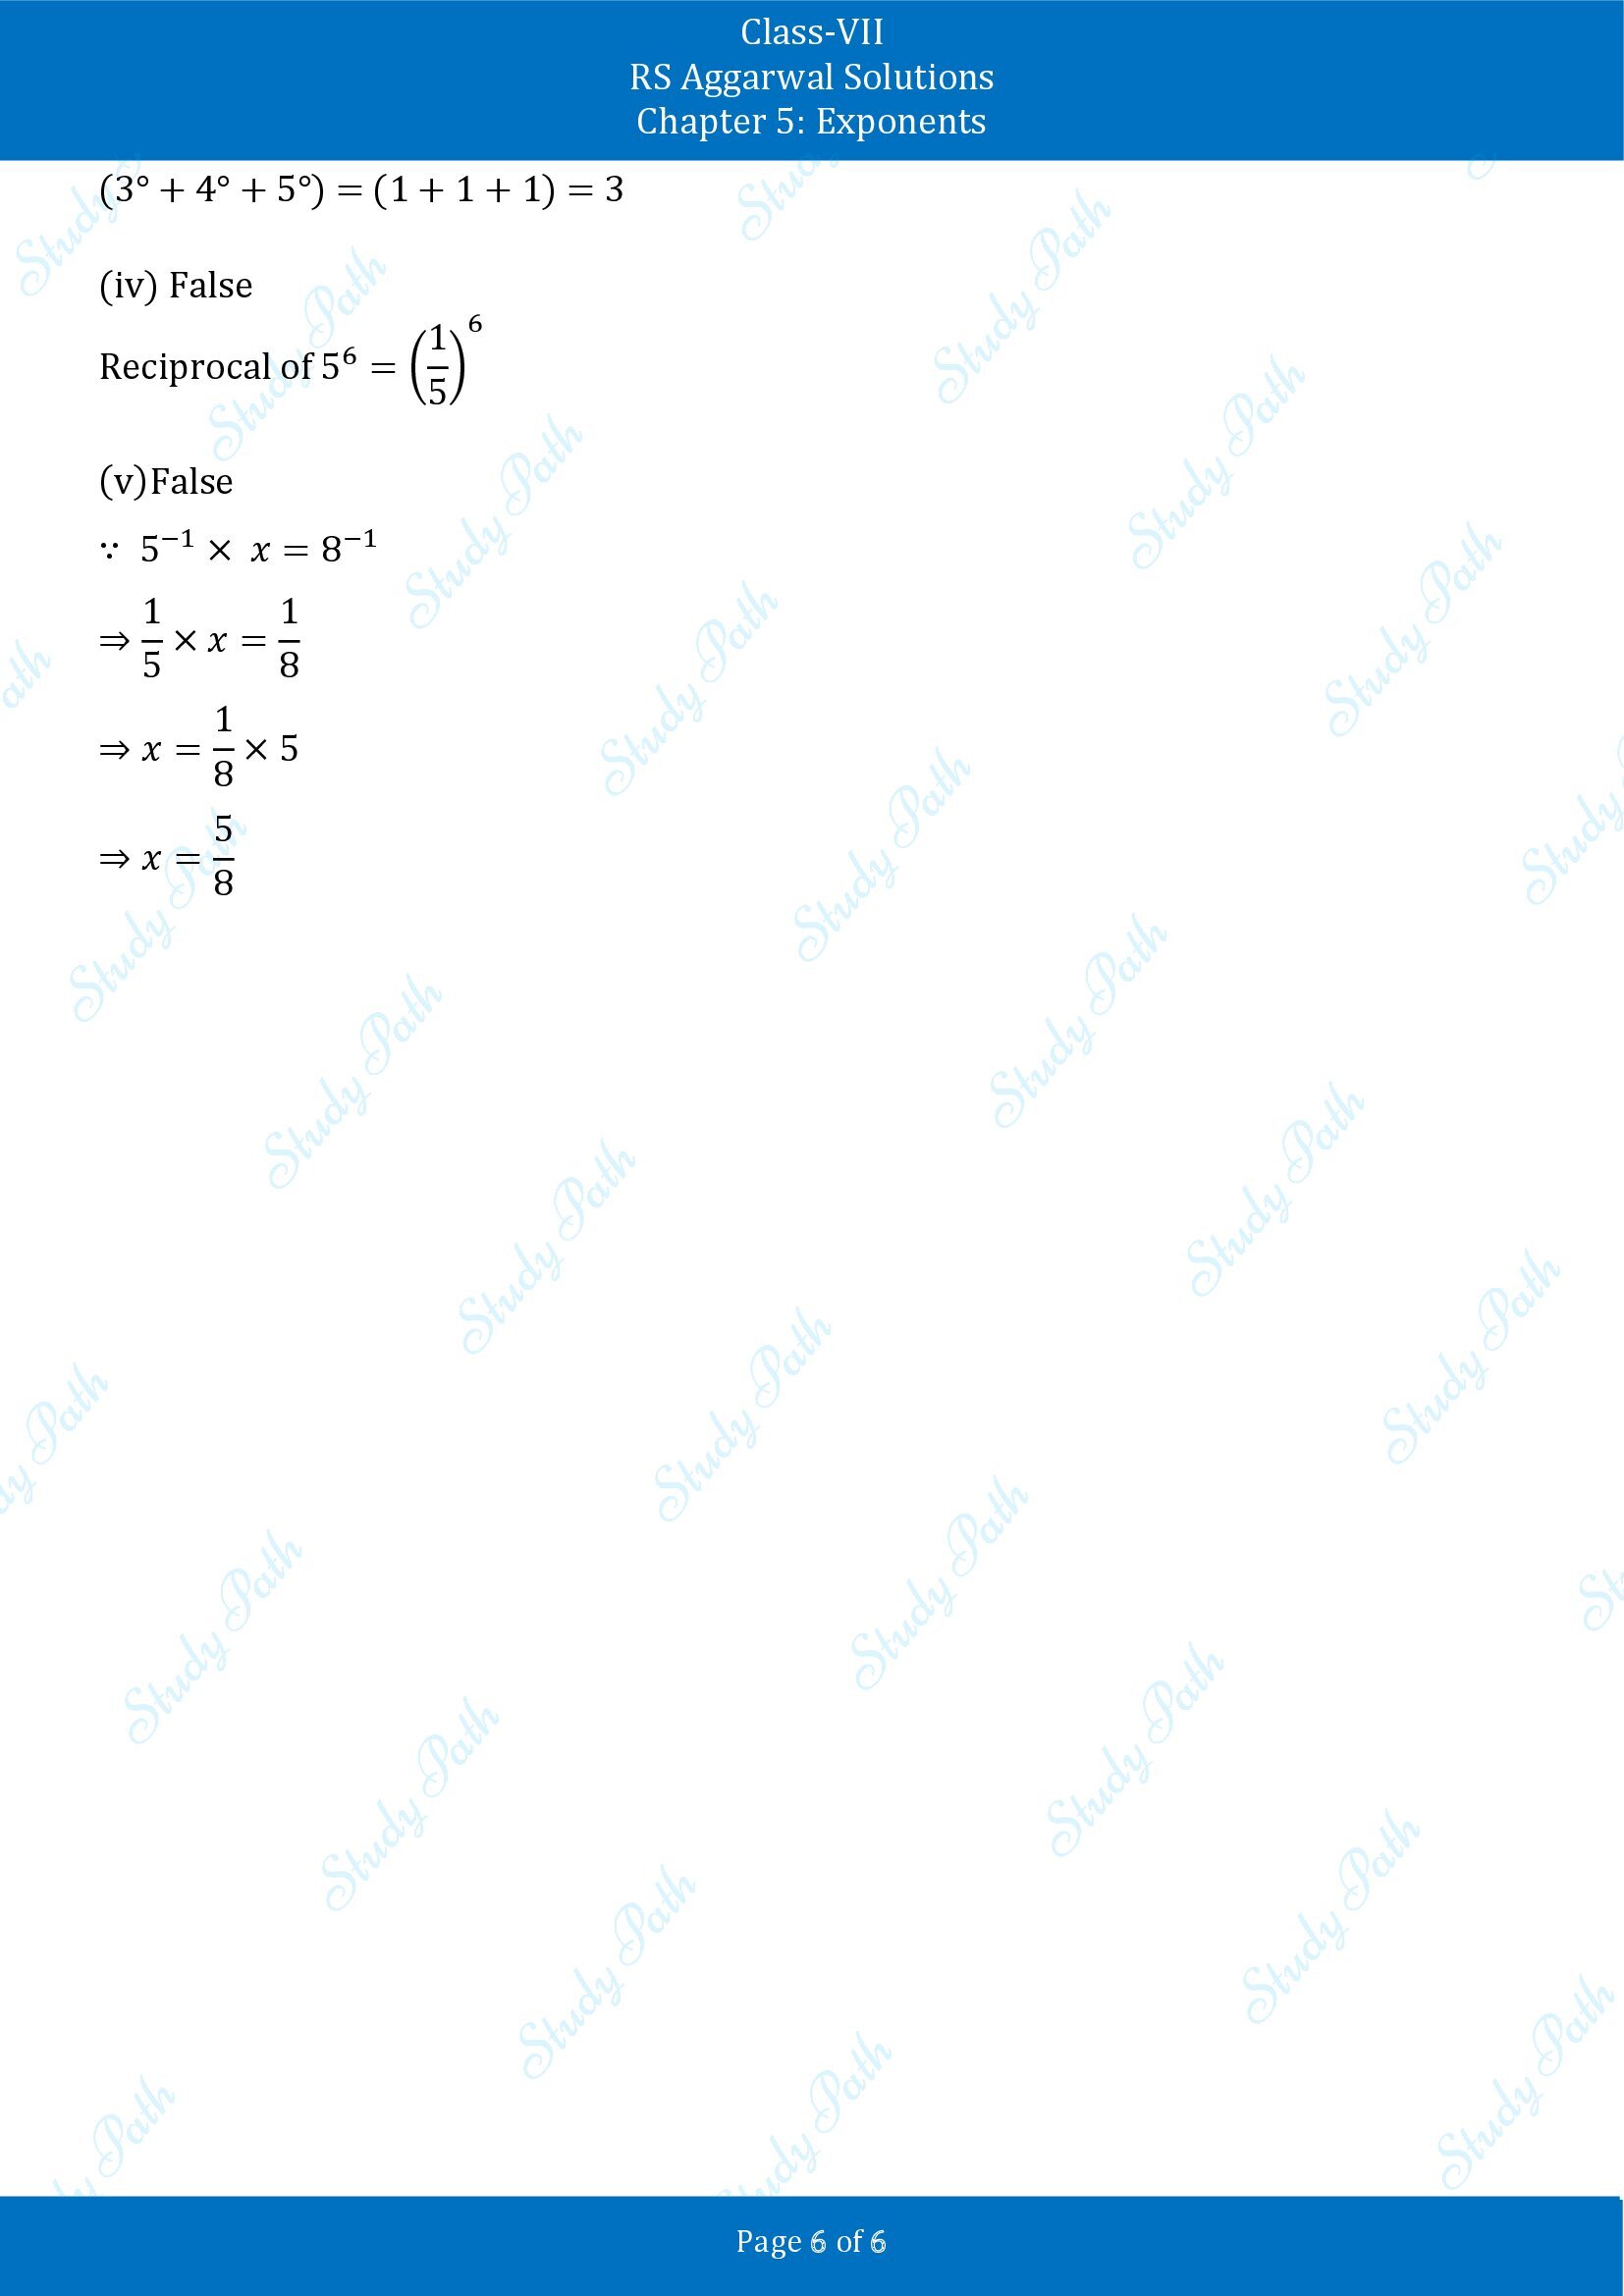 RS Aggarwal Solutions Class 7 Chapter 5 Exponents Test Paper 00006